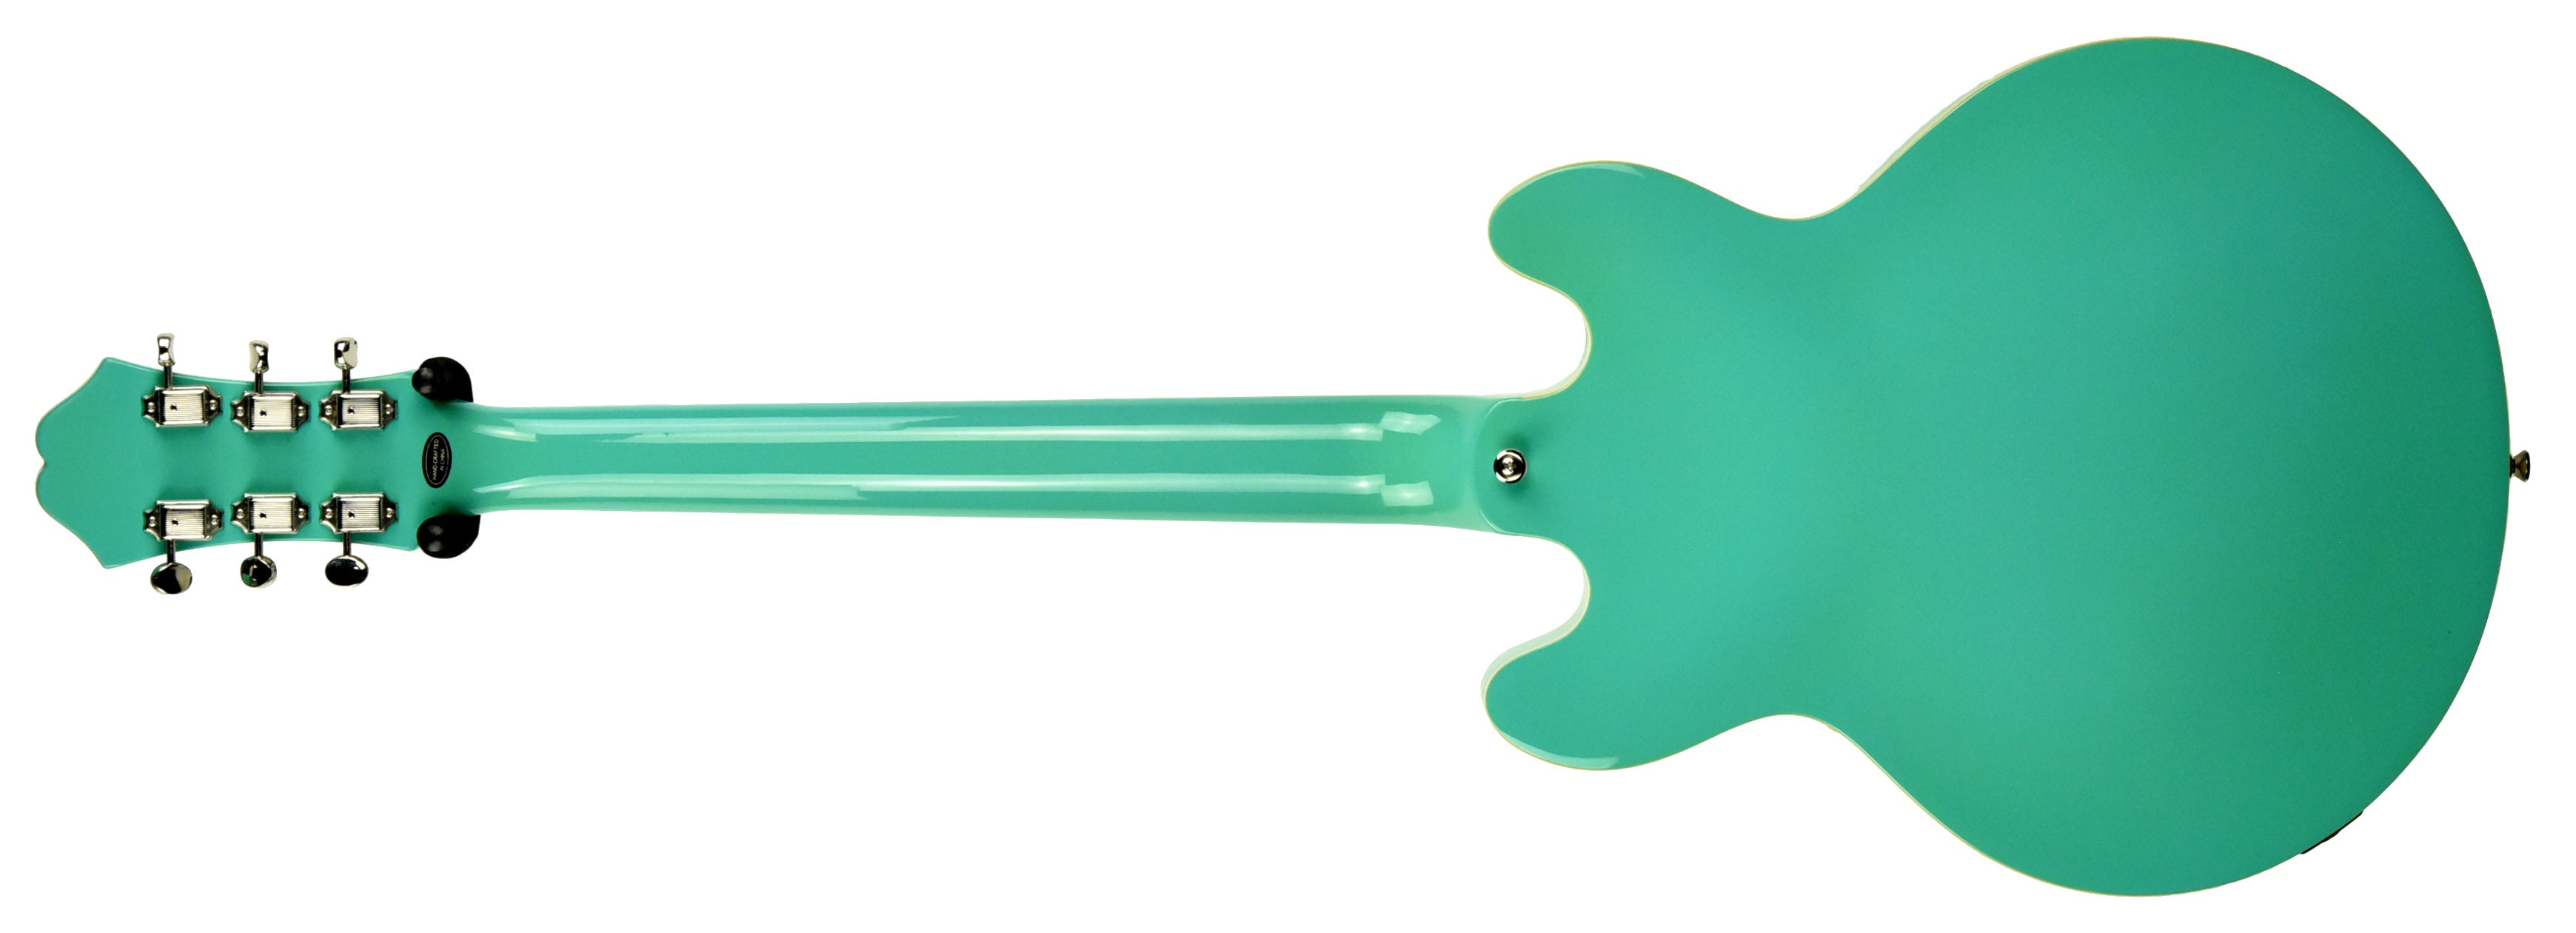 Epiphone Casino Coupe Electric Guitar in Turquoise 20031520528 